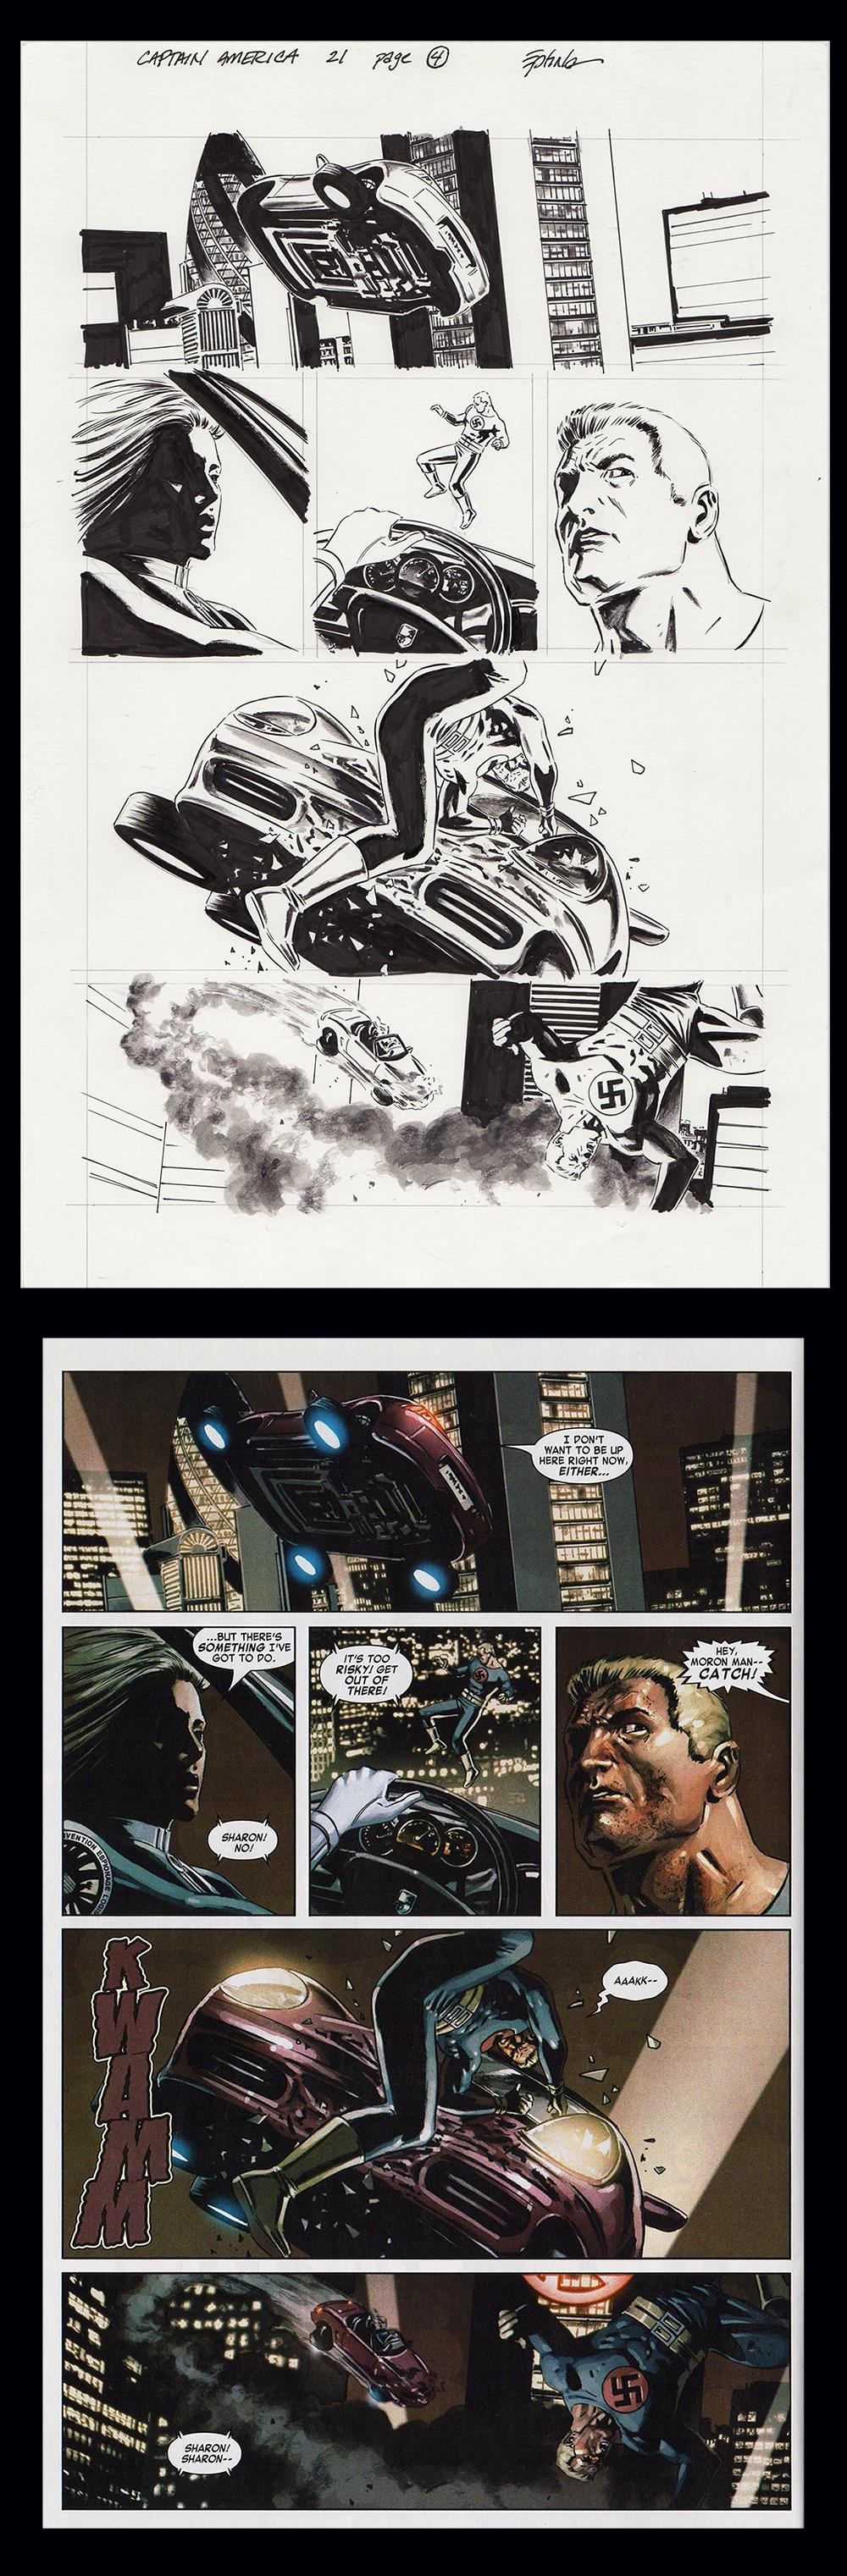 Image: Captain America #21 page 4 art by Steve Epting